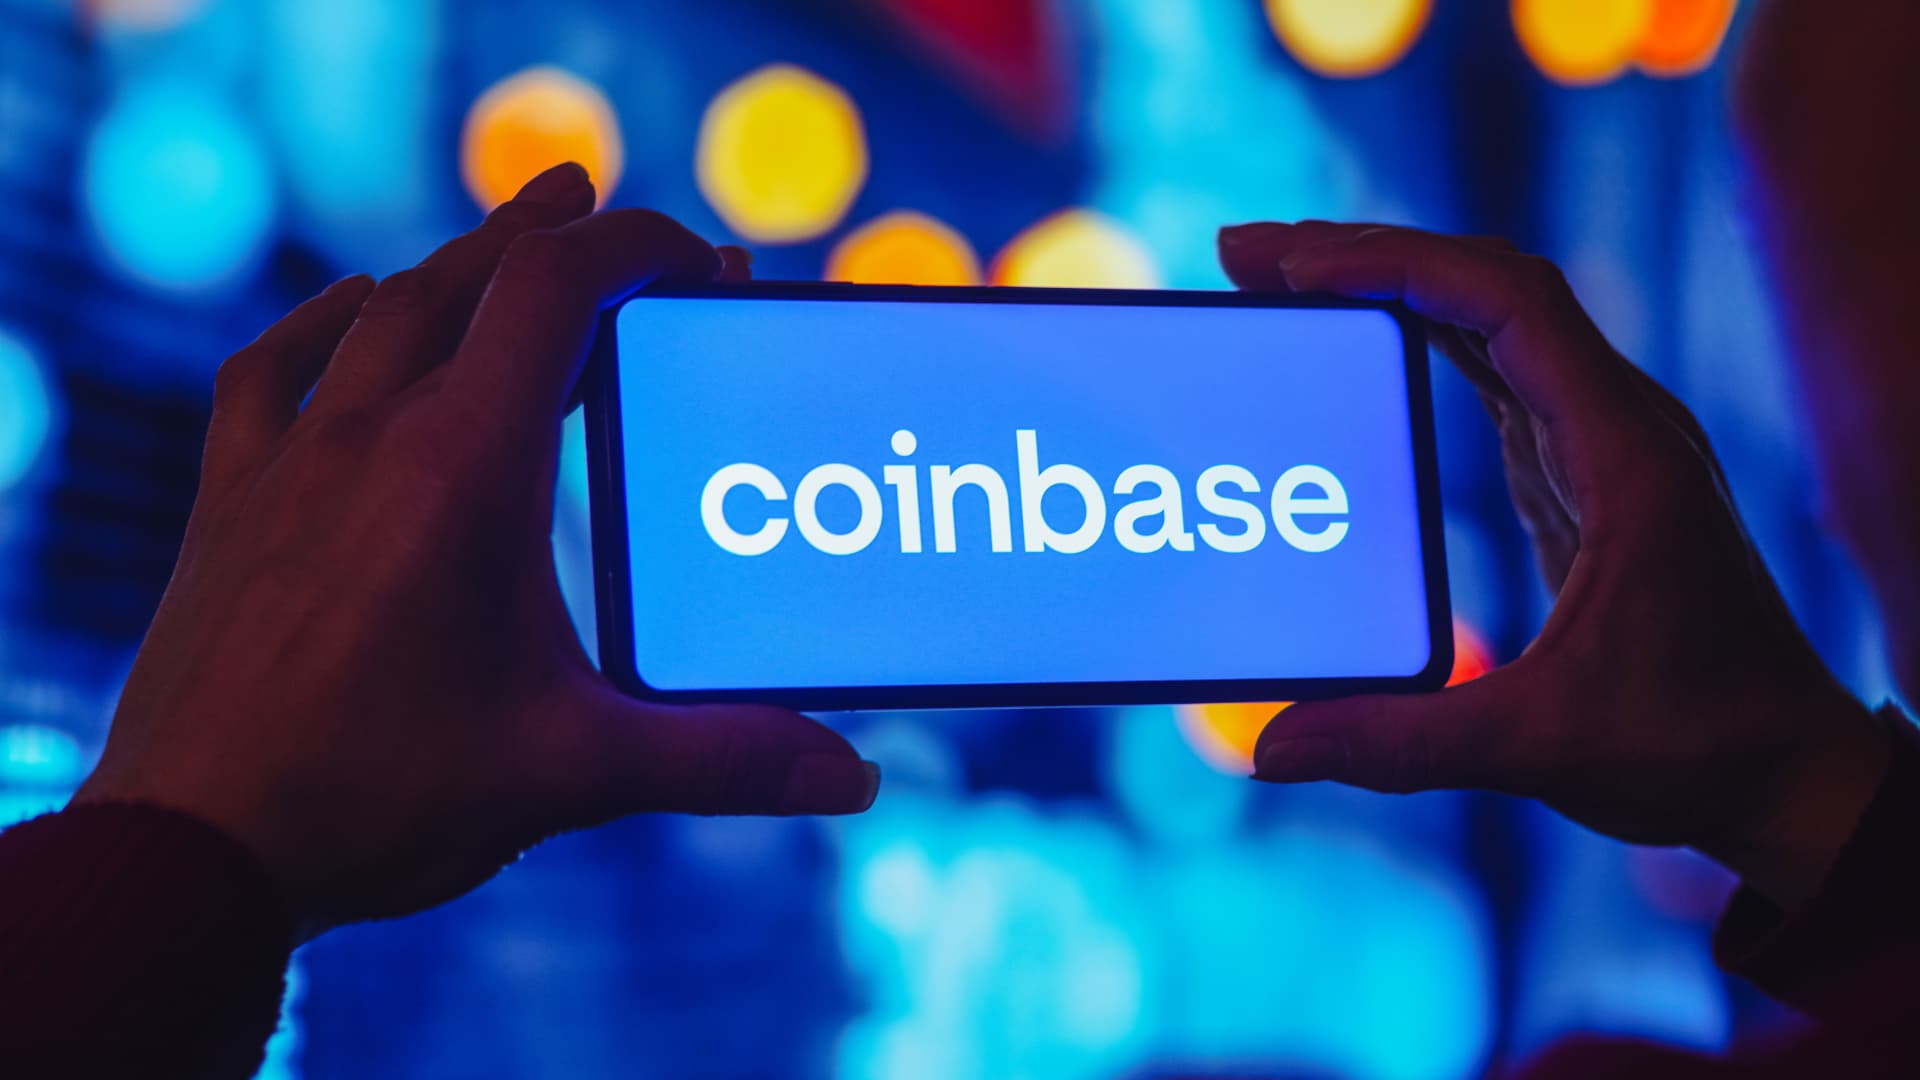 Coinbase Advanced Launches Perpetual Futures Contracts for Bitcoin, Ethereum, Litecoin, and XRP